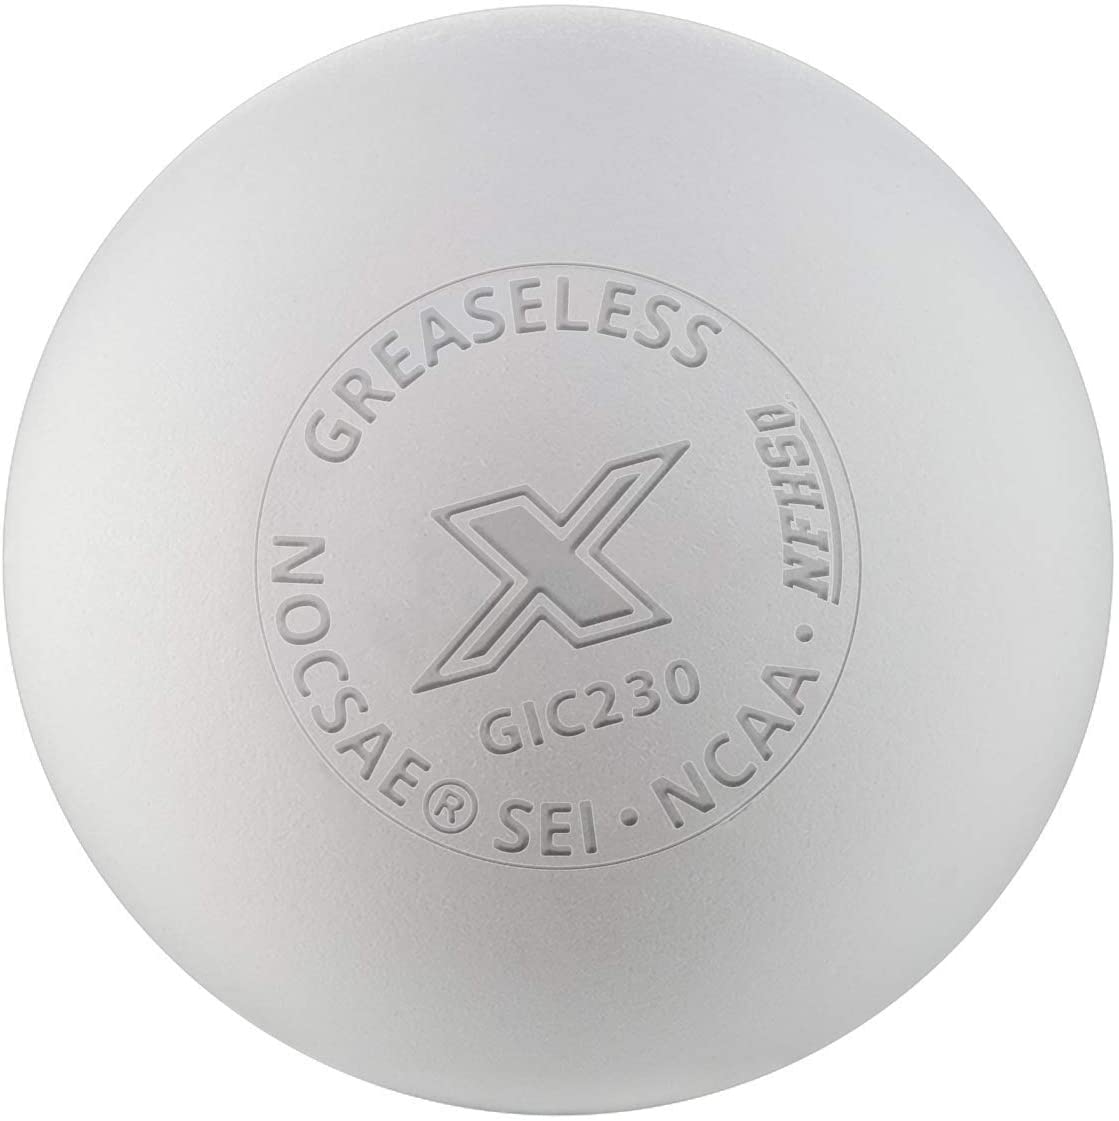 Guardian Innovations Pearl X Rubber Lacrosse Balls, 3-Pack